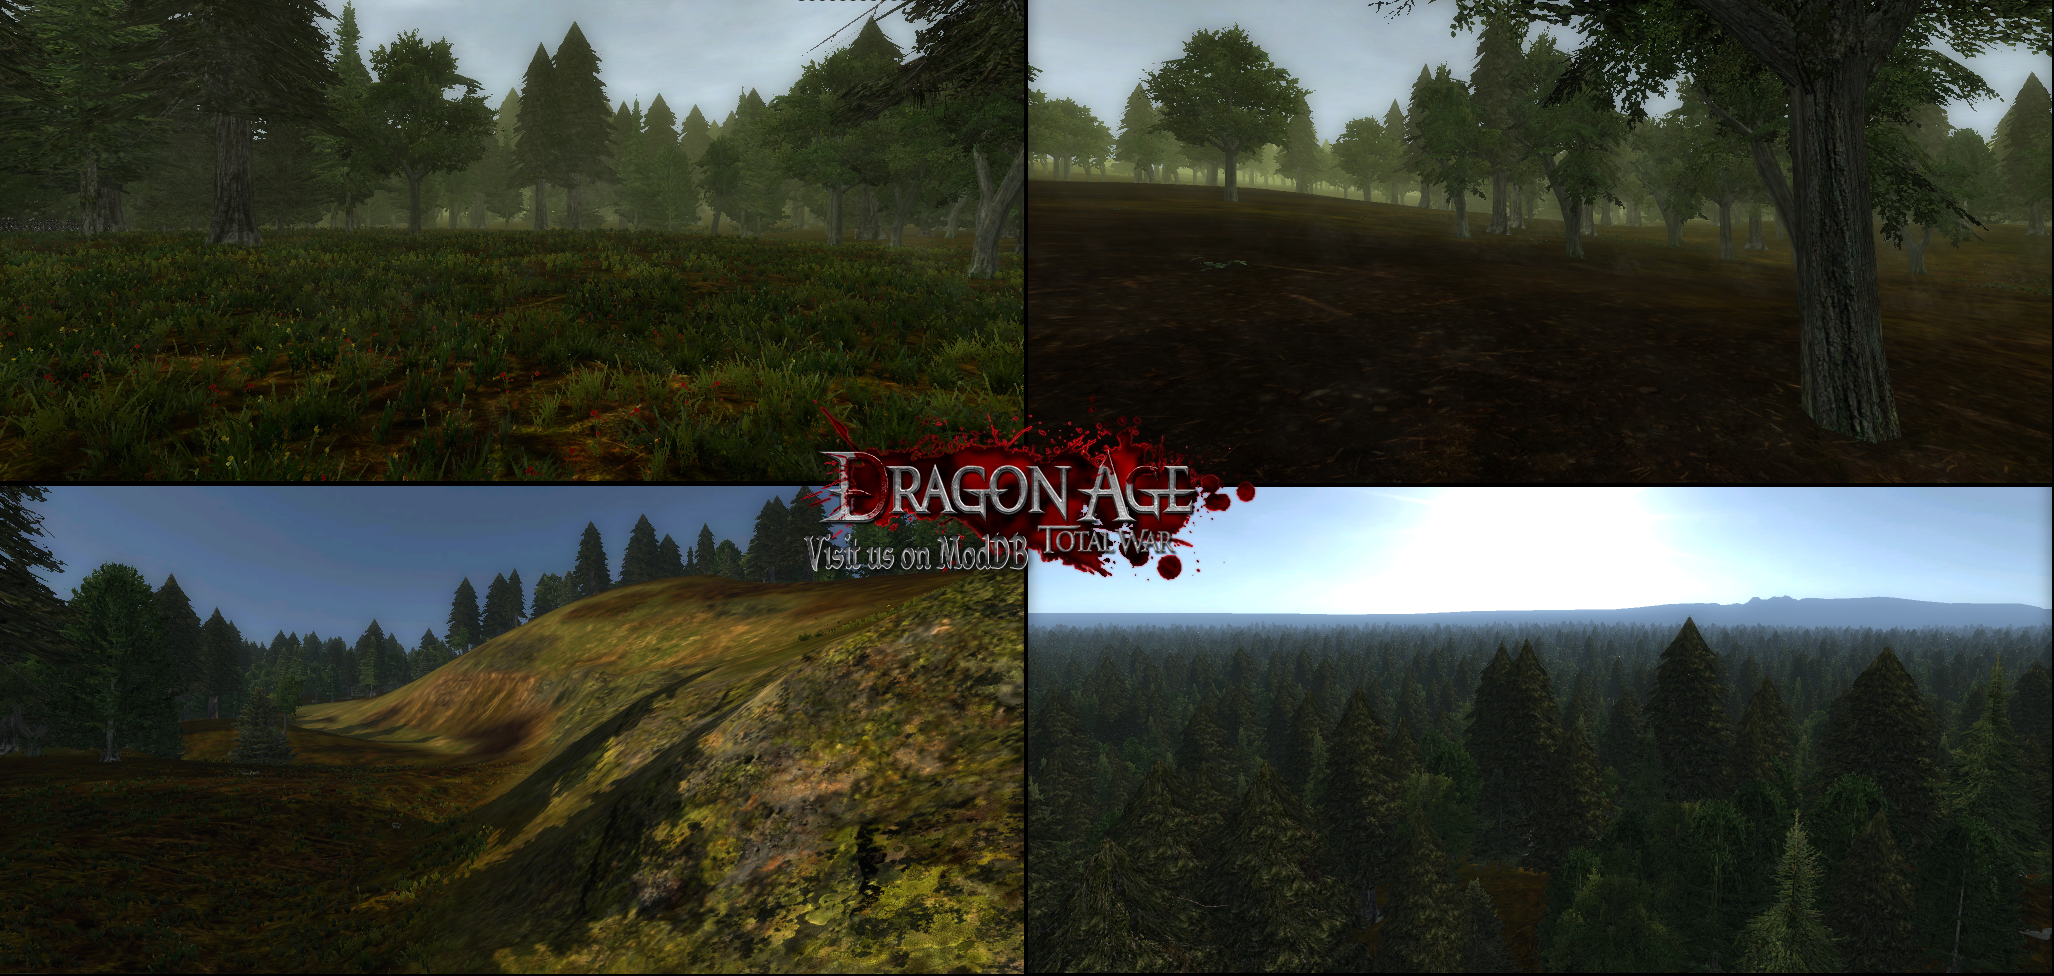 Skyrim' Meets 'Dragon Age' With These Mods